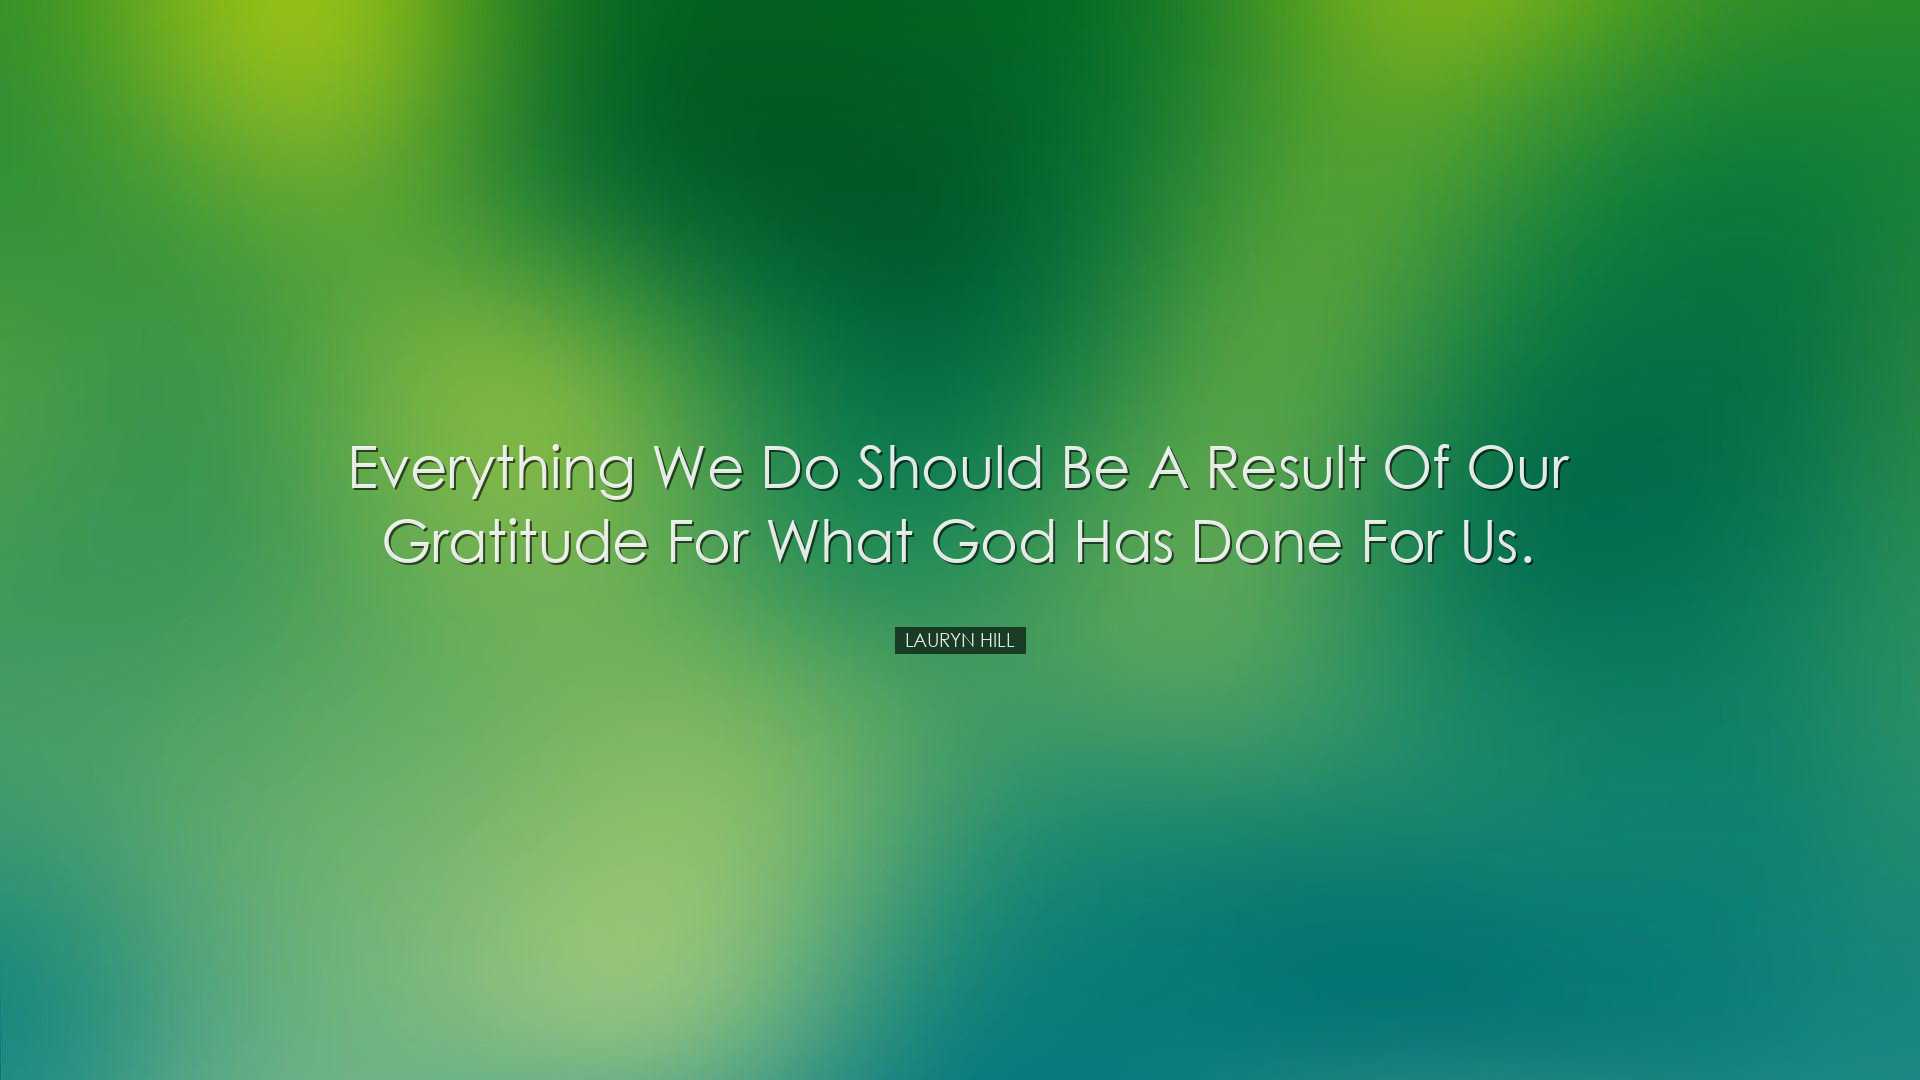 Everything we do should be a result of our gratitude for what God